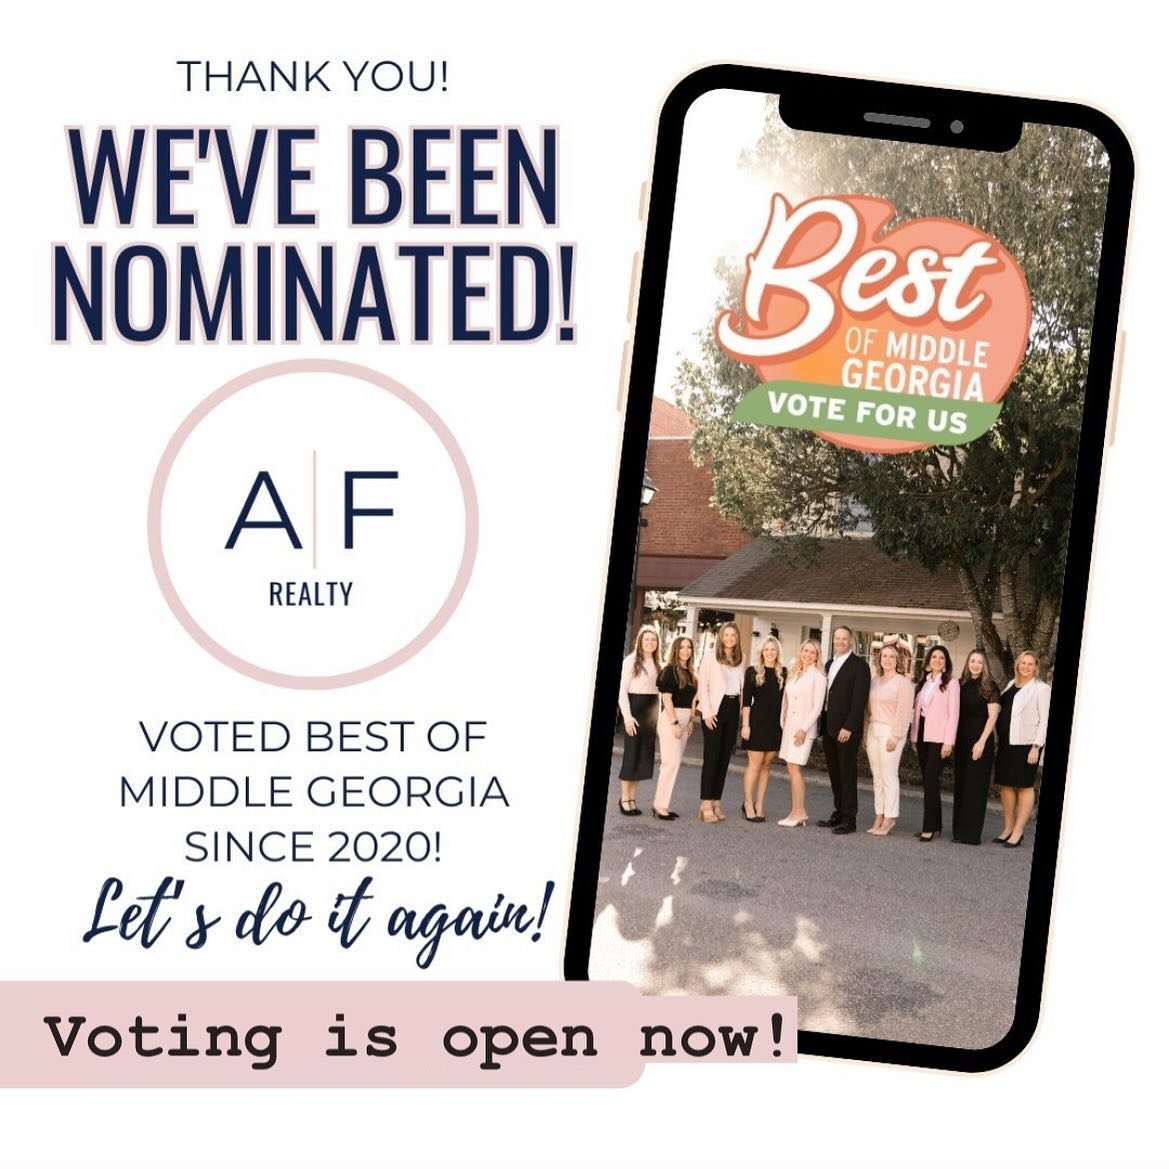 🏡🗳️ The voting for the Best of Middle Georgia has begun, and once again, we are asking for your support! Your vote means the world to us and helps us continue to provide exceptional service to our community. 

Cast your vote today and every day thr